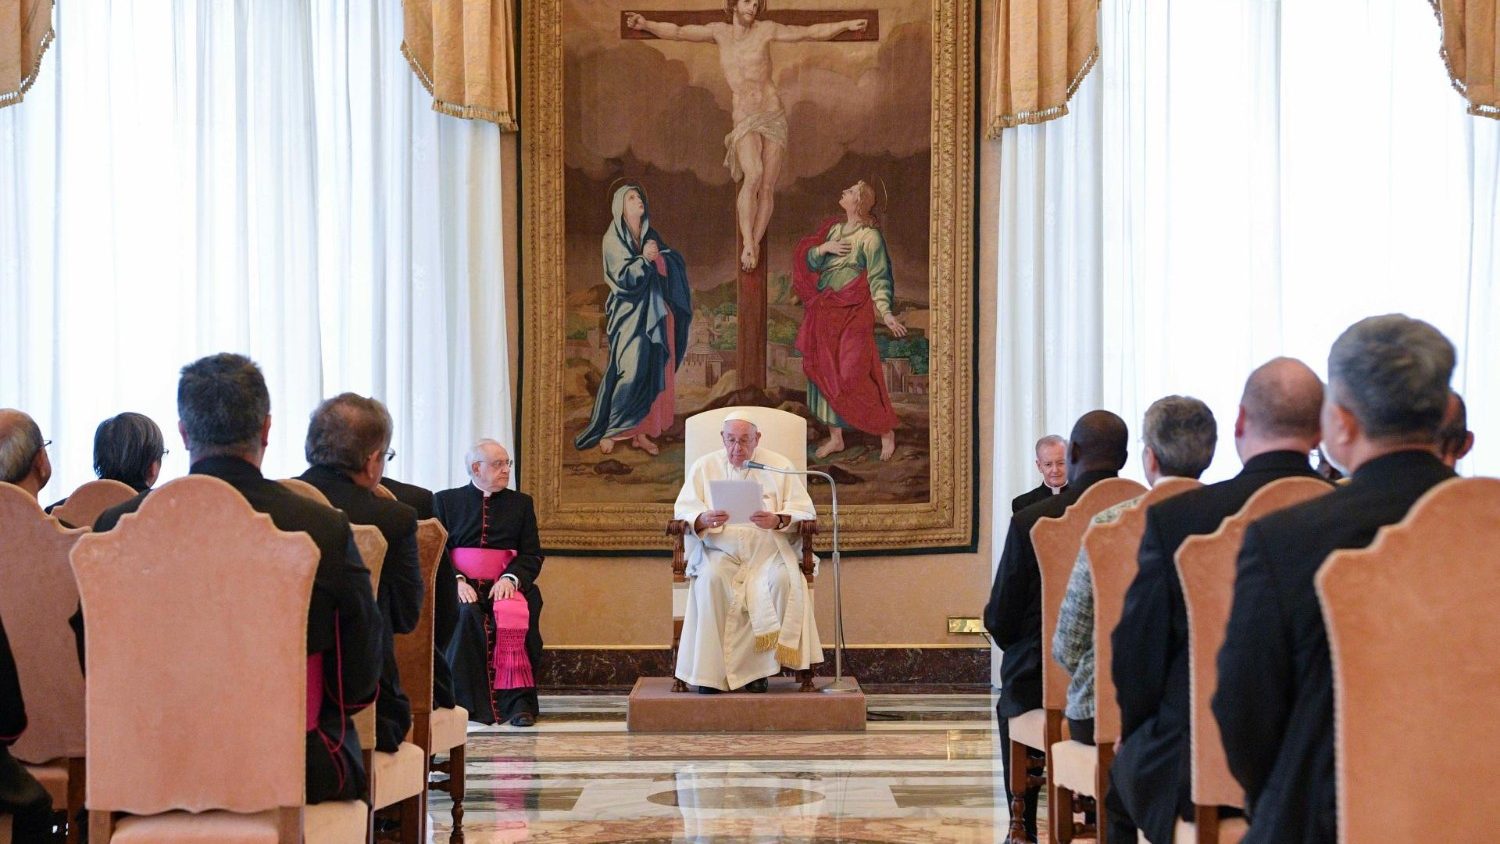 The Pope told theologians: Go further, Tradition is not about backwardness